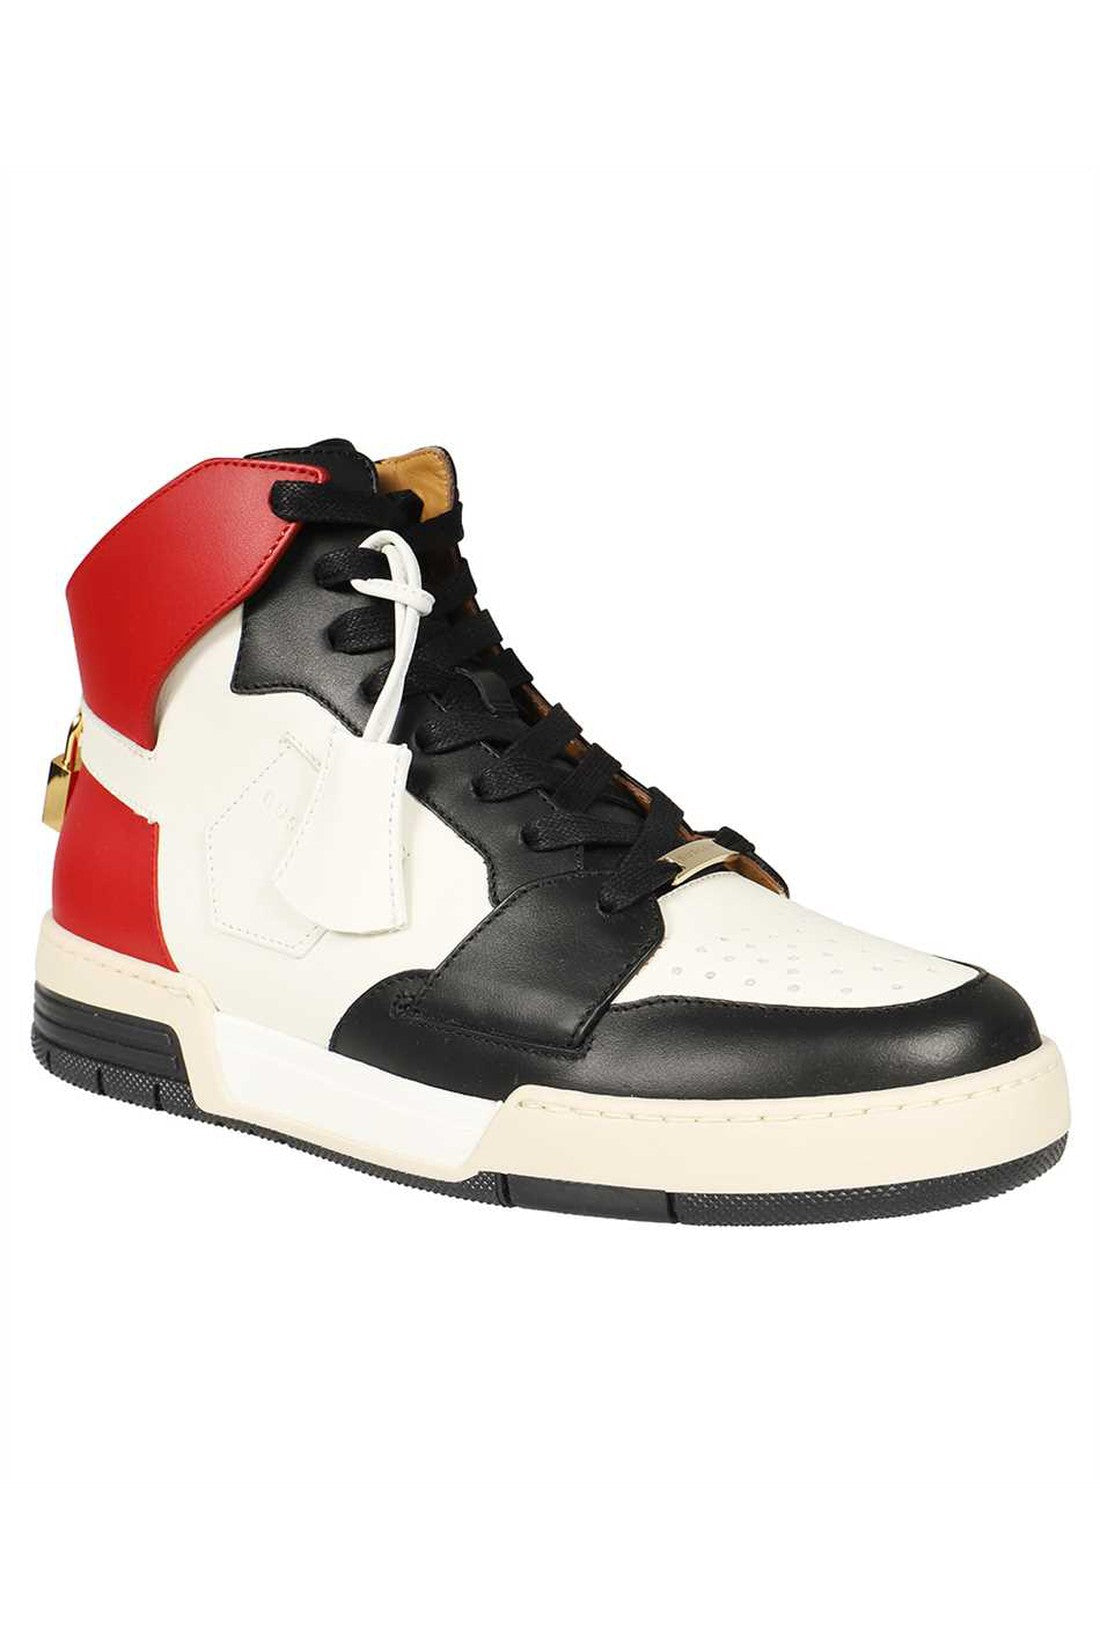 Leather high-top sneakers-Buscemi-OUTLET-SALE-ARCHIVIST